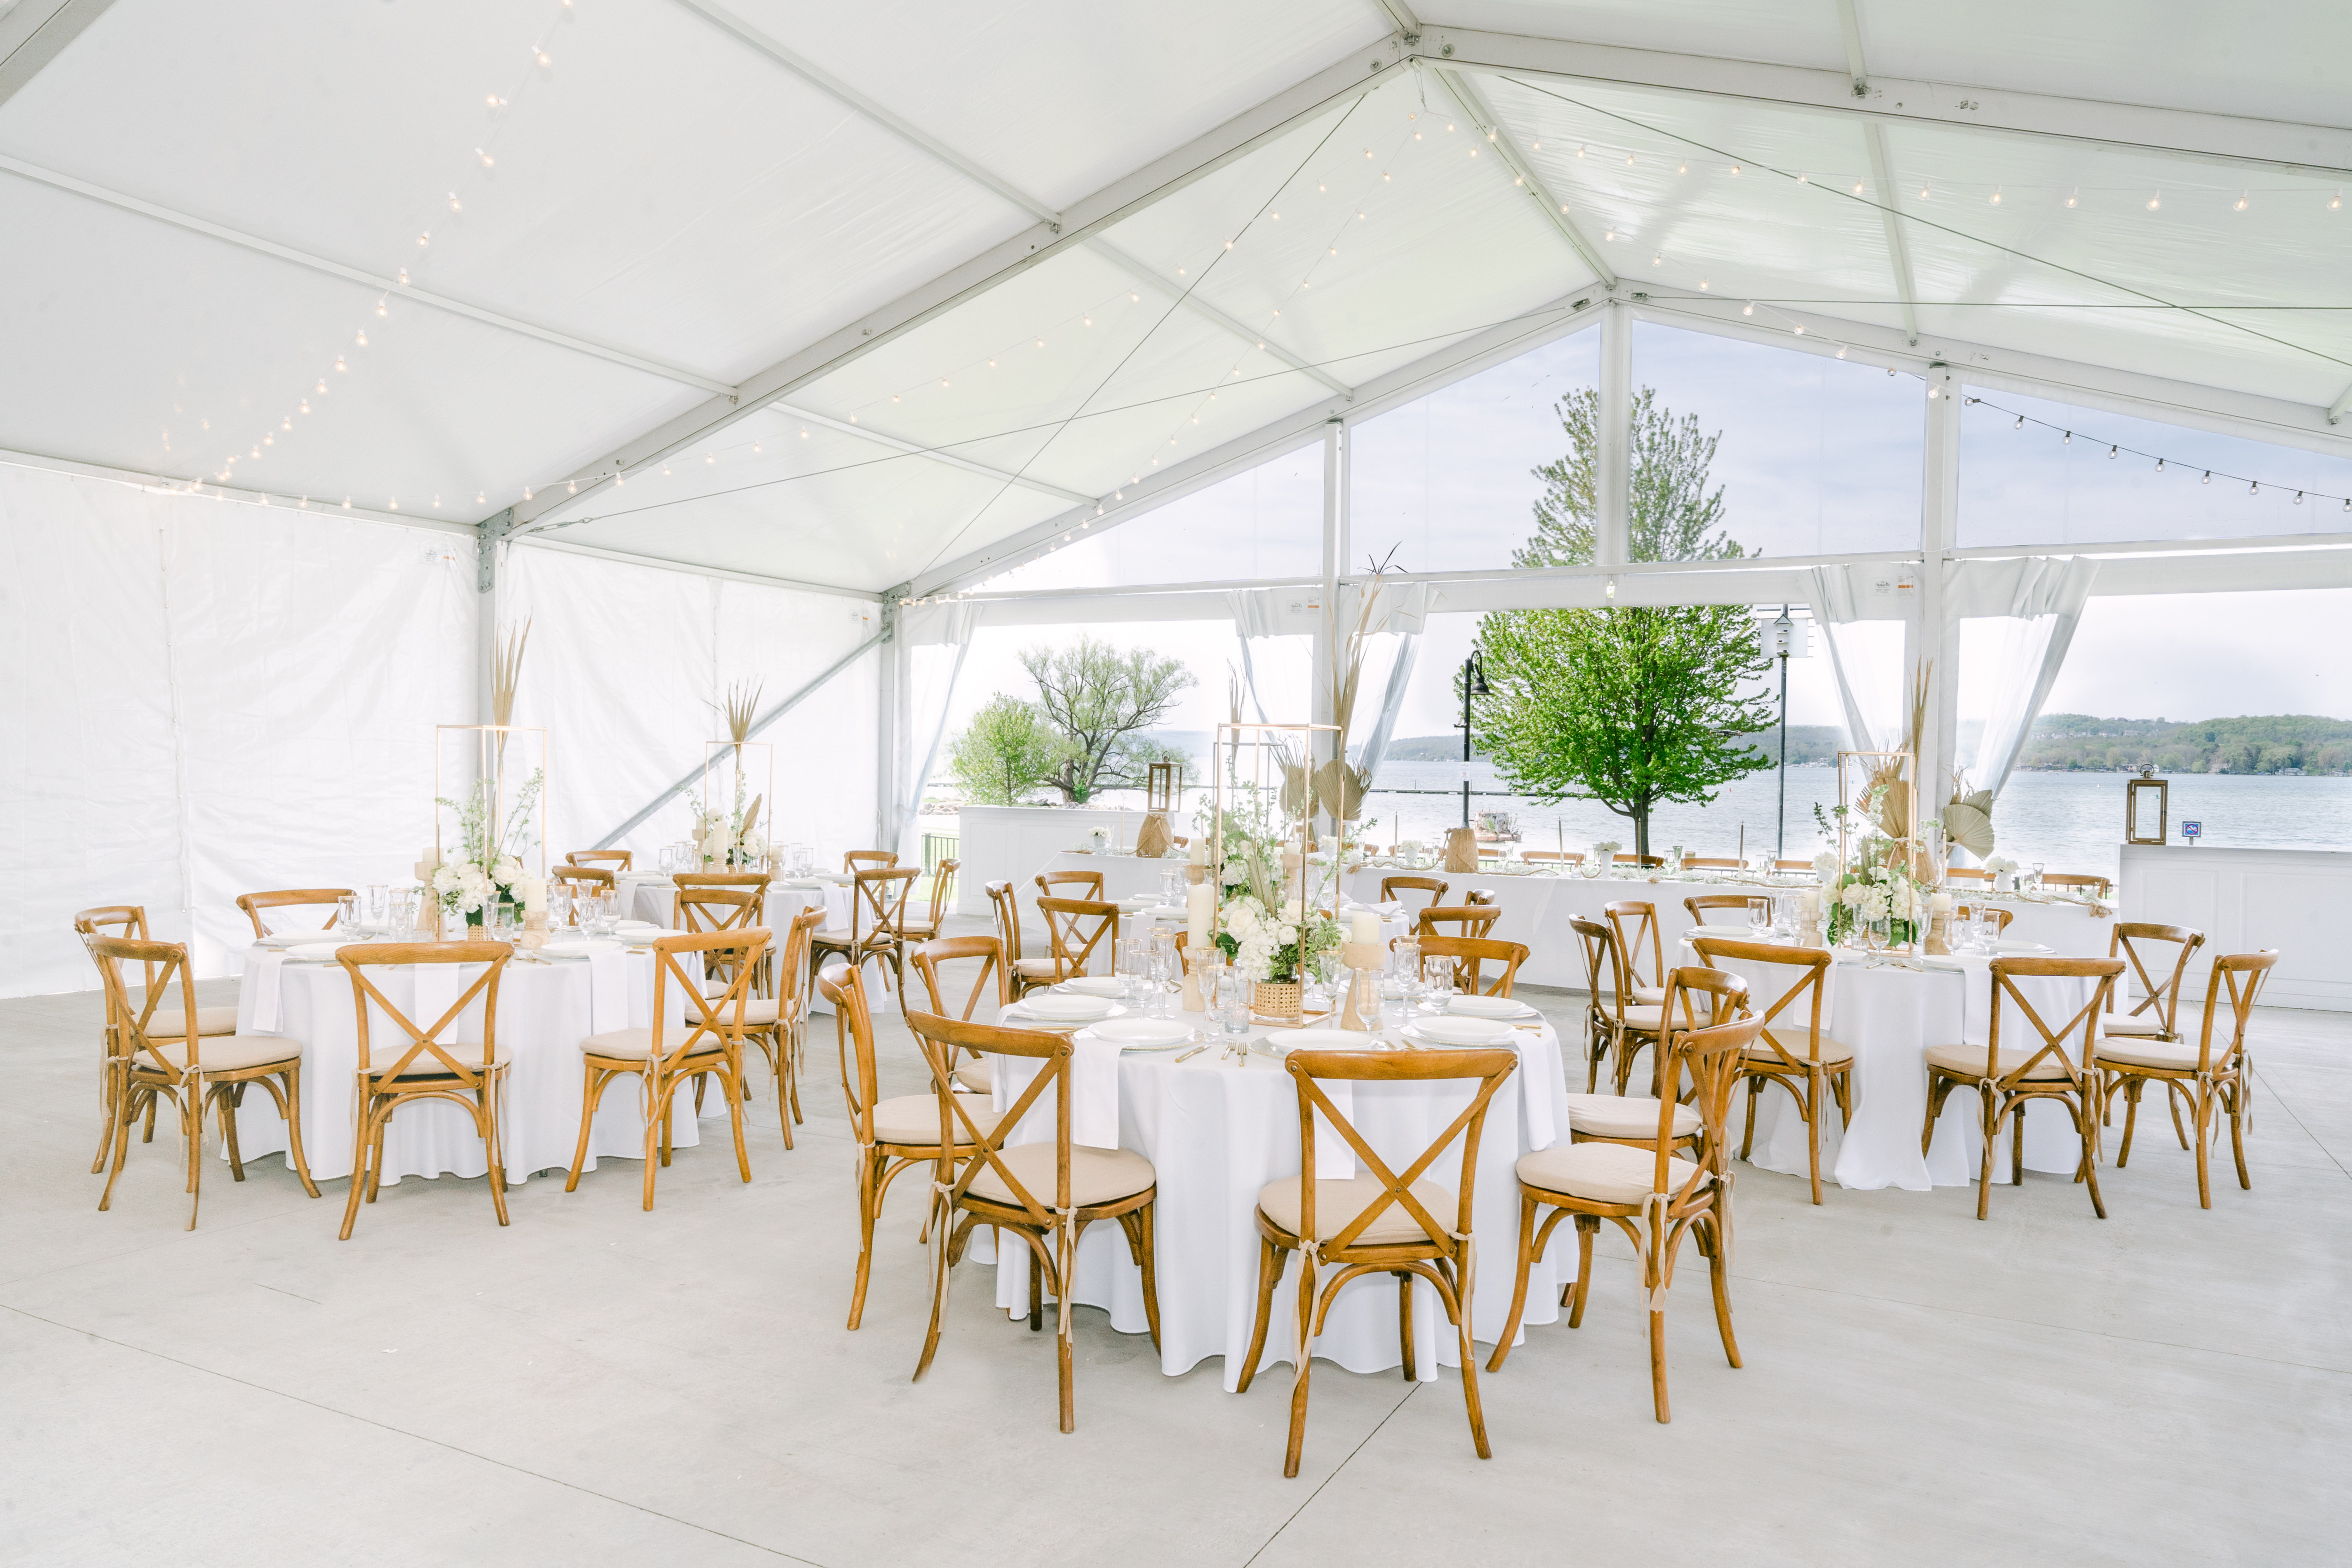 Wedding setup with tables and chairs